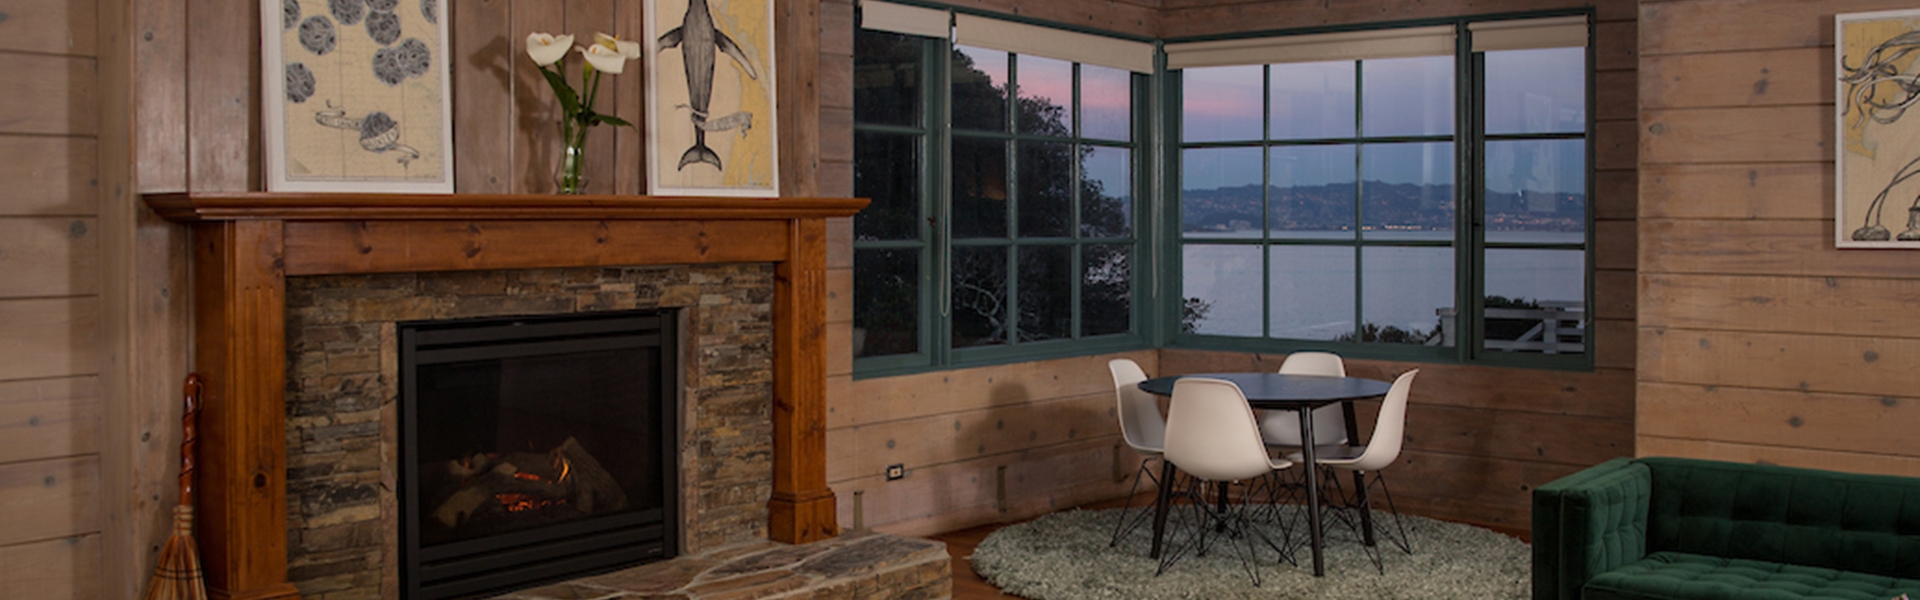 hearth lounge with fireplace and sunset view out windows